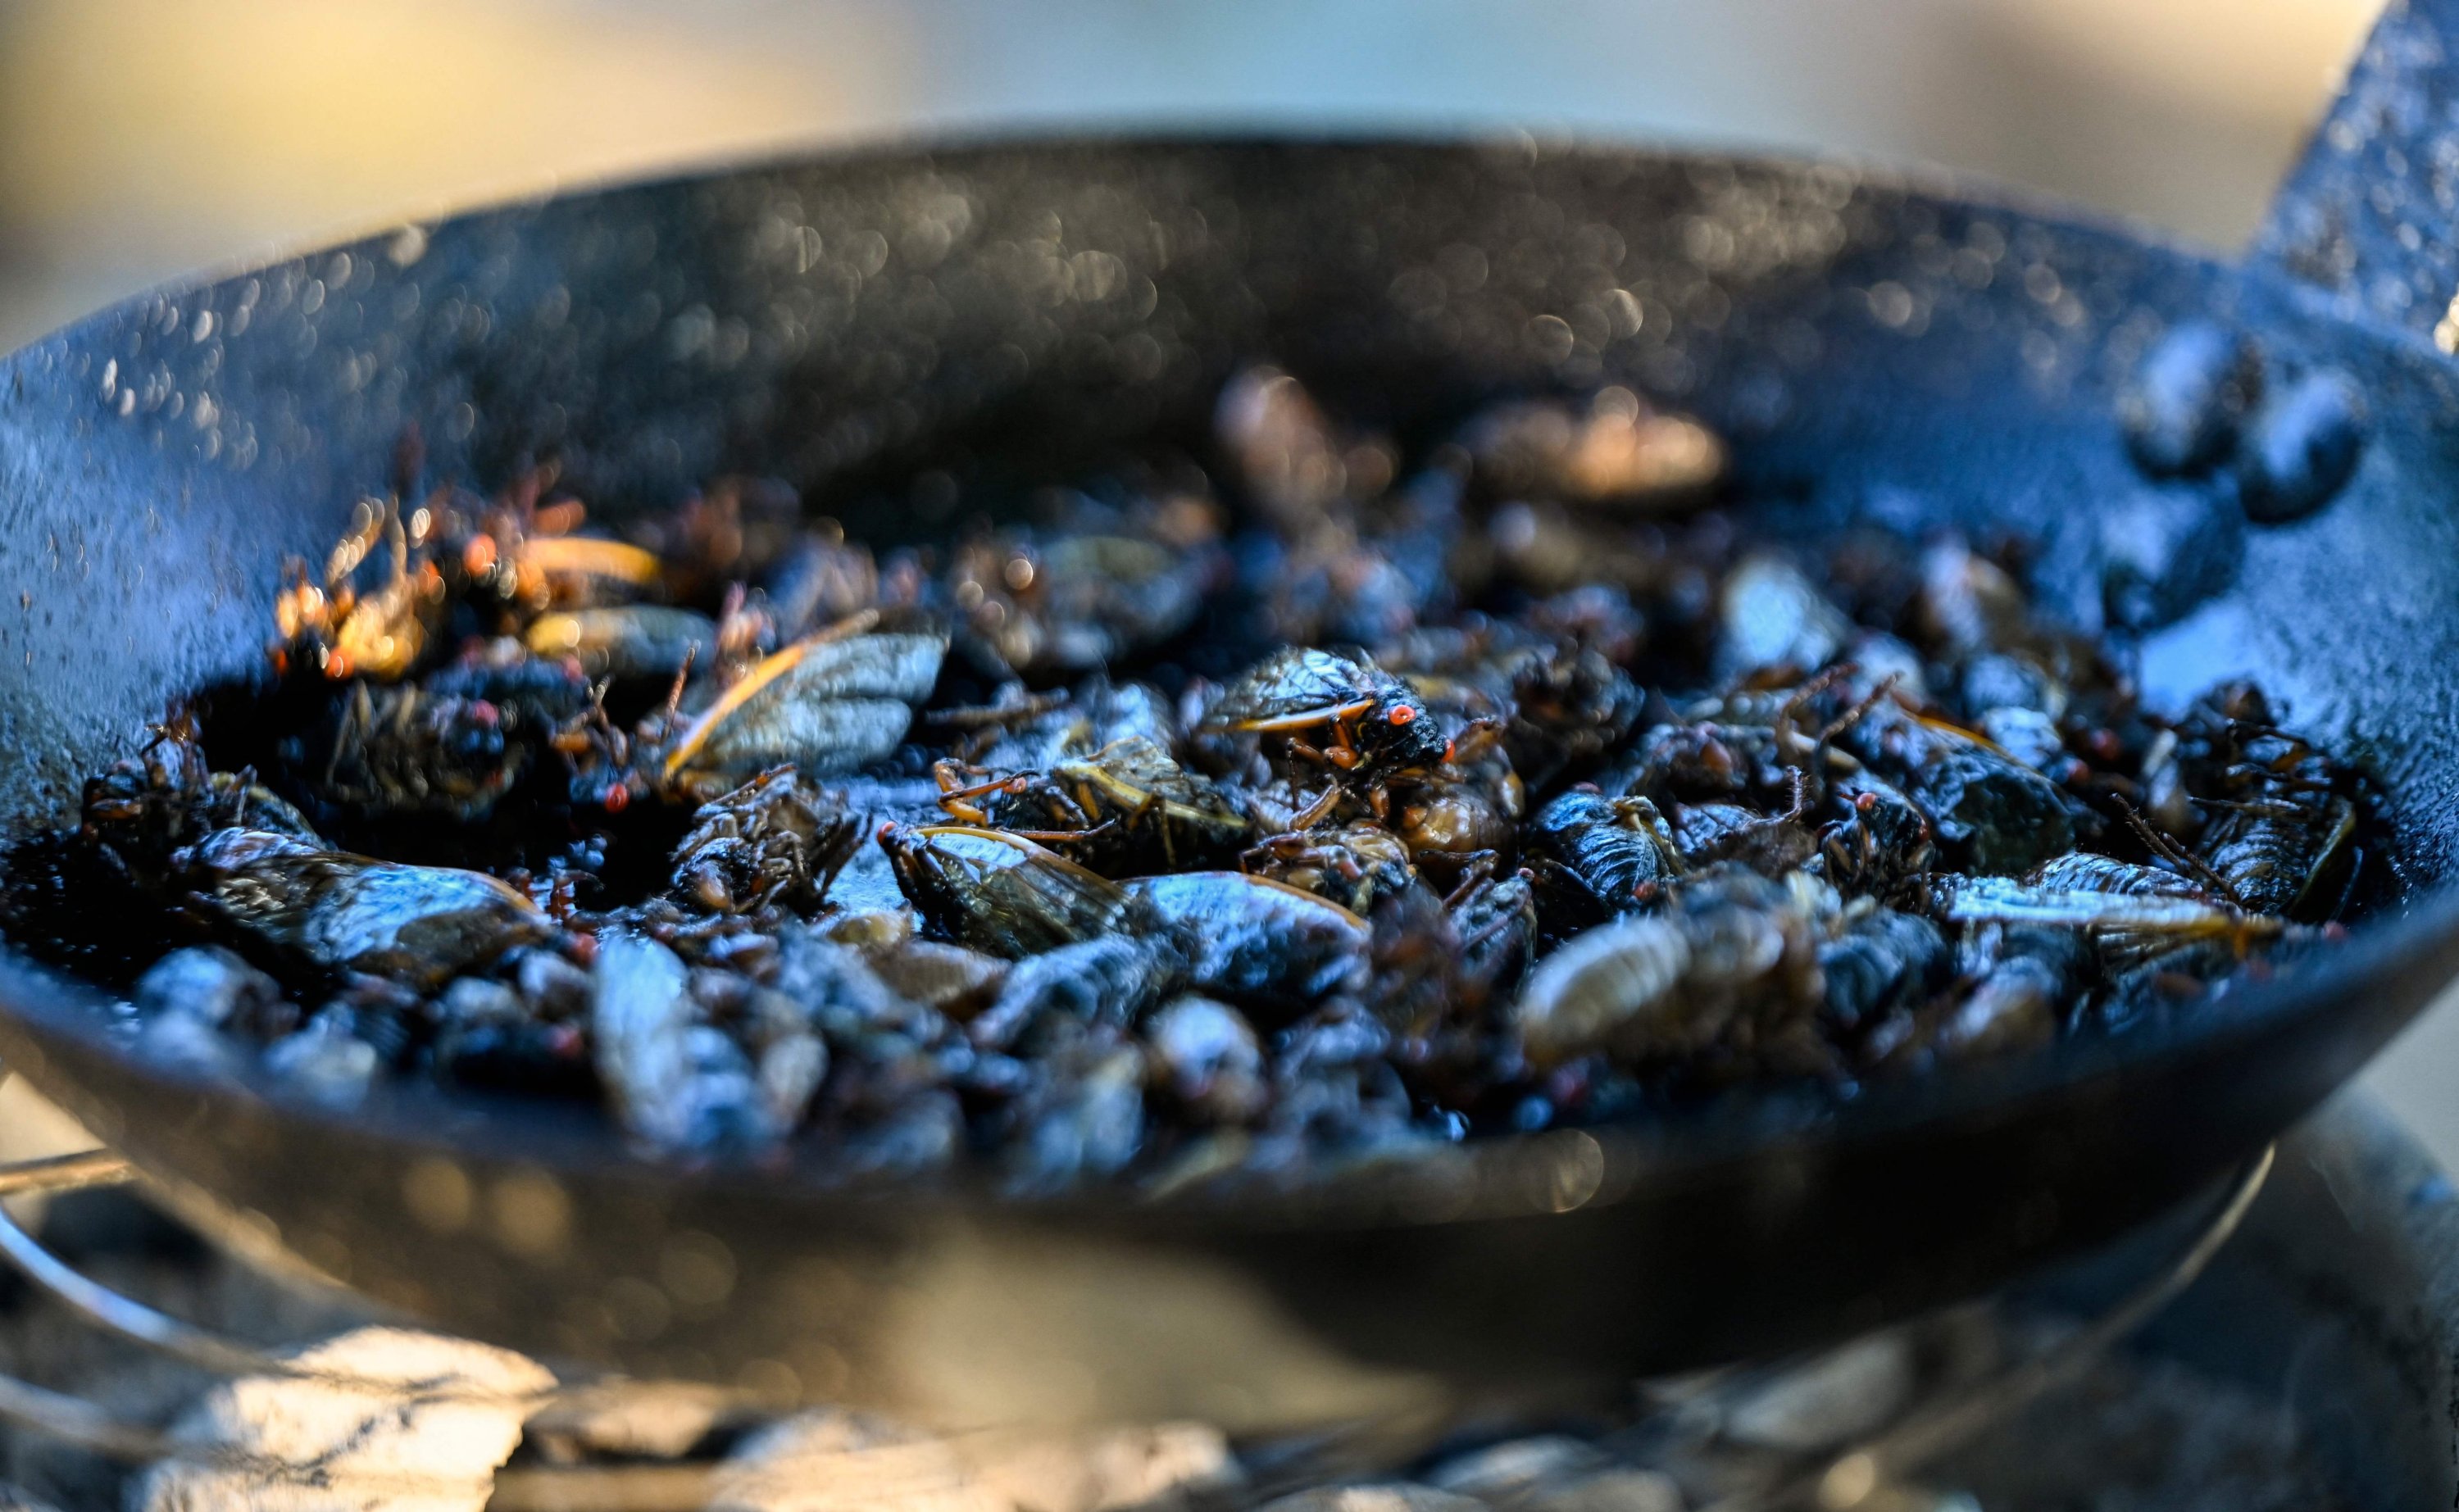 Cicadas are fried as they are prepared for a sushi recipe by Chef Bun Lai at Fort Totten Park in Washington, U.S., May 23, 2021. (AFP Photo)